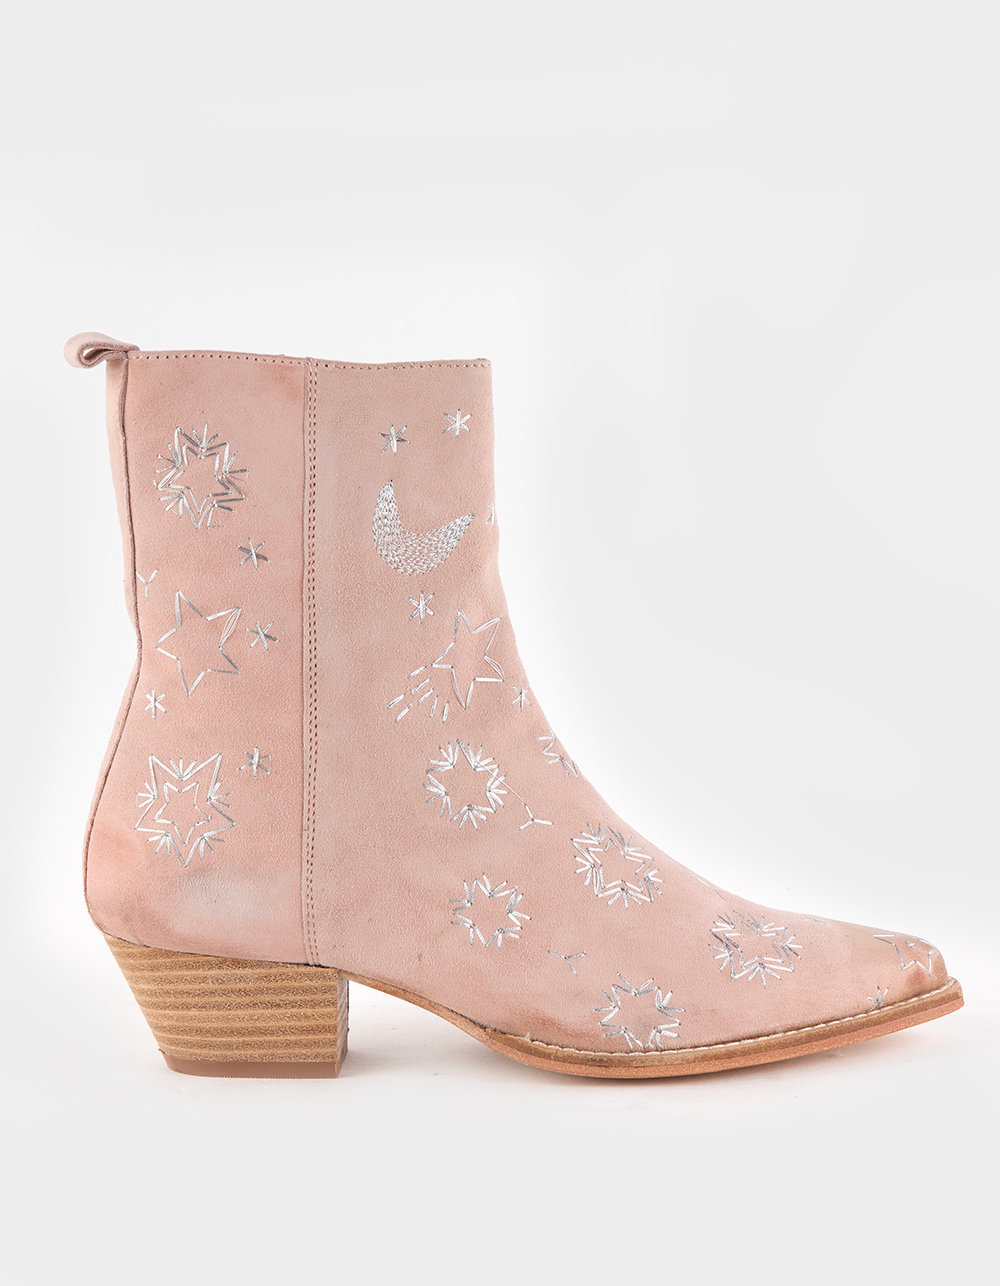 FREE PEOPLE Bowers Embroidered Womens Boots - STONE | Tillys